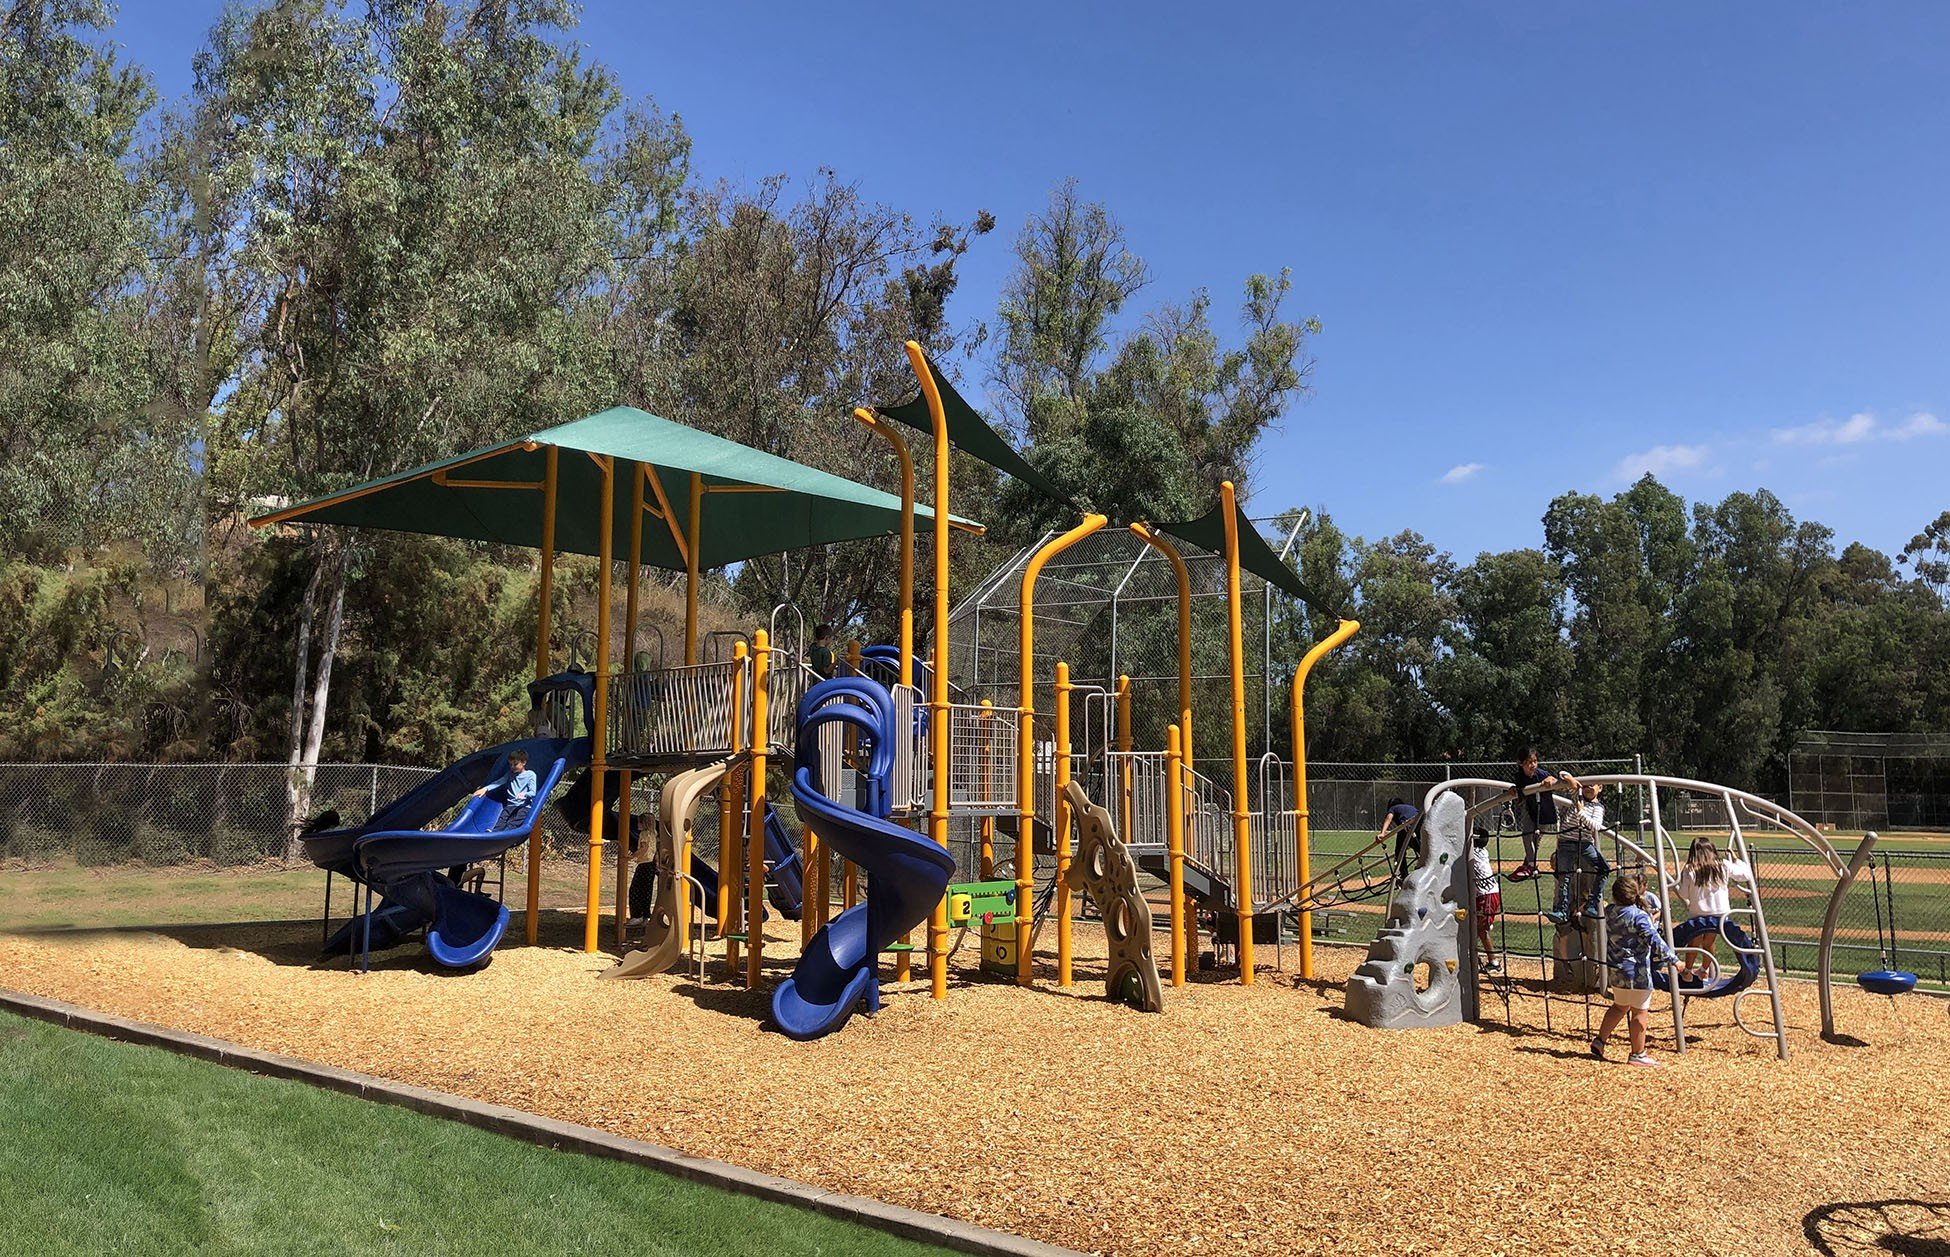 Featured image of yellow colored playground with children playing on swings in the corner